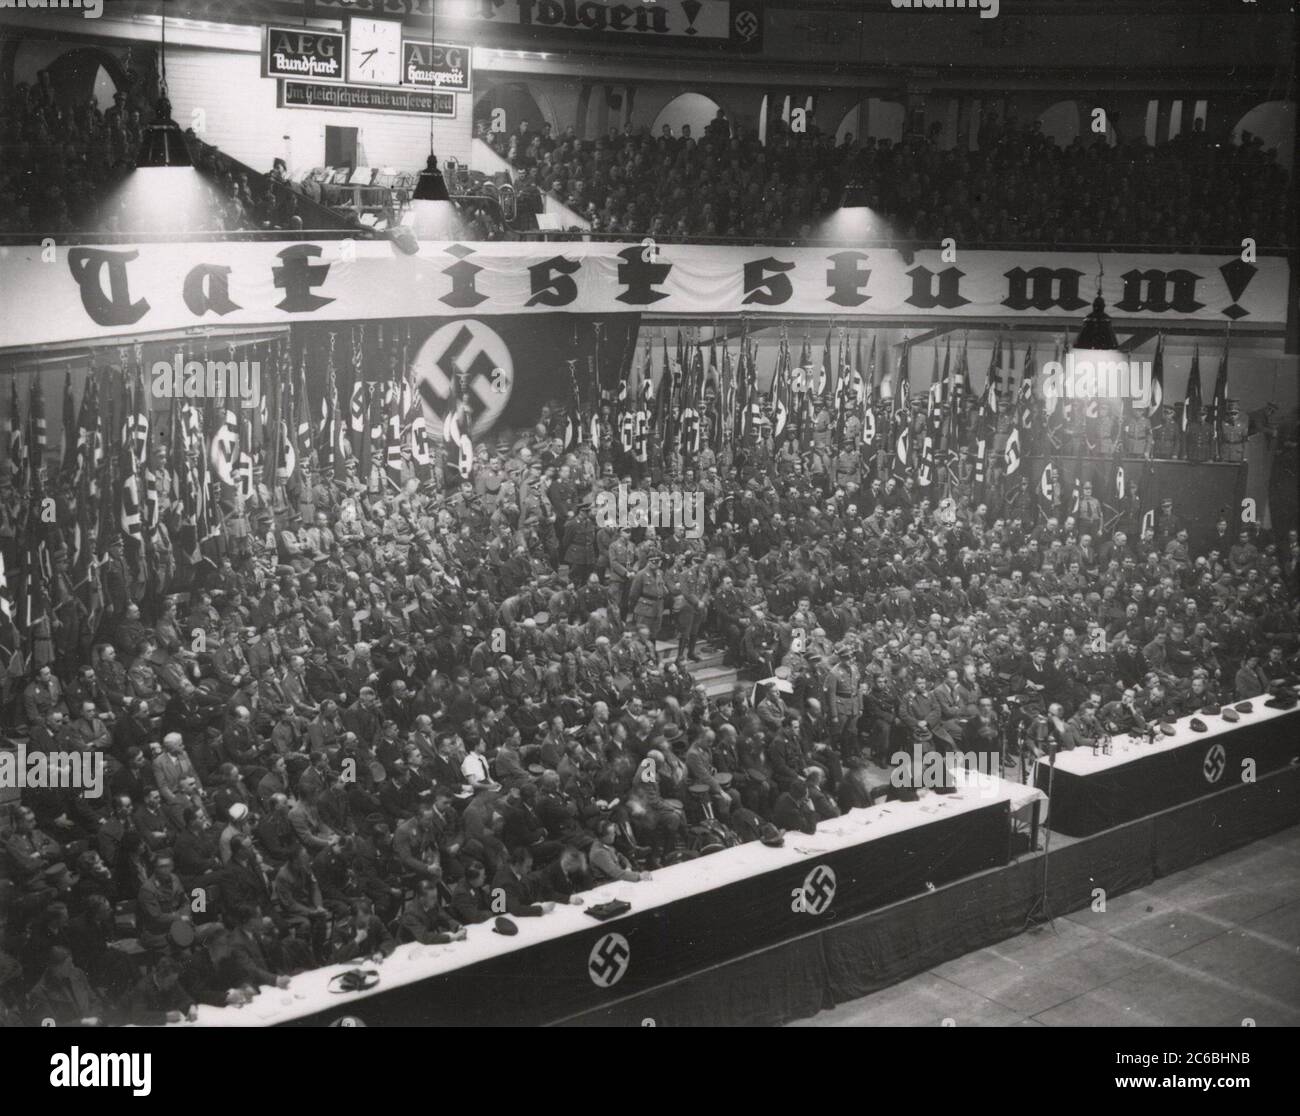 Mass rally in the Berlin Sportpalast - Goebbels speaks Heinrich Hoffmann Photographs 1934 Adolf Hitler's official photographer, and a Nazi politician and publisher, who was a member of Hitler's intimate circle. Stock Photo